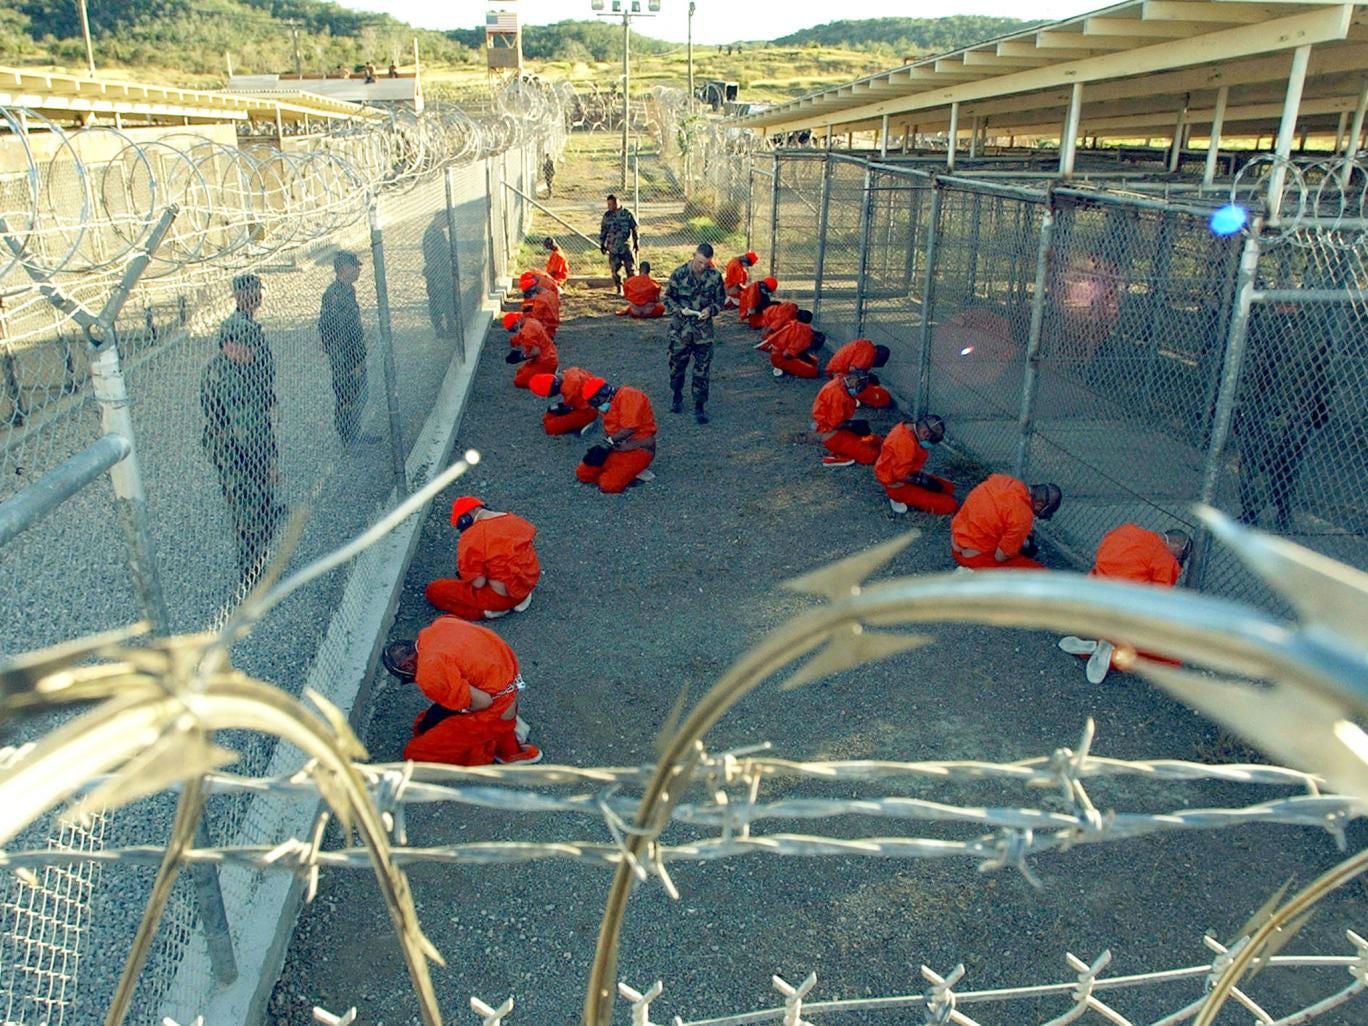 The images of prisoners arriving at Guantanamo Bay sparked international outcry